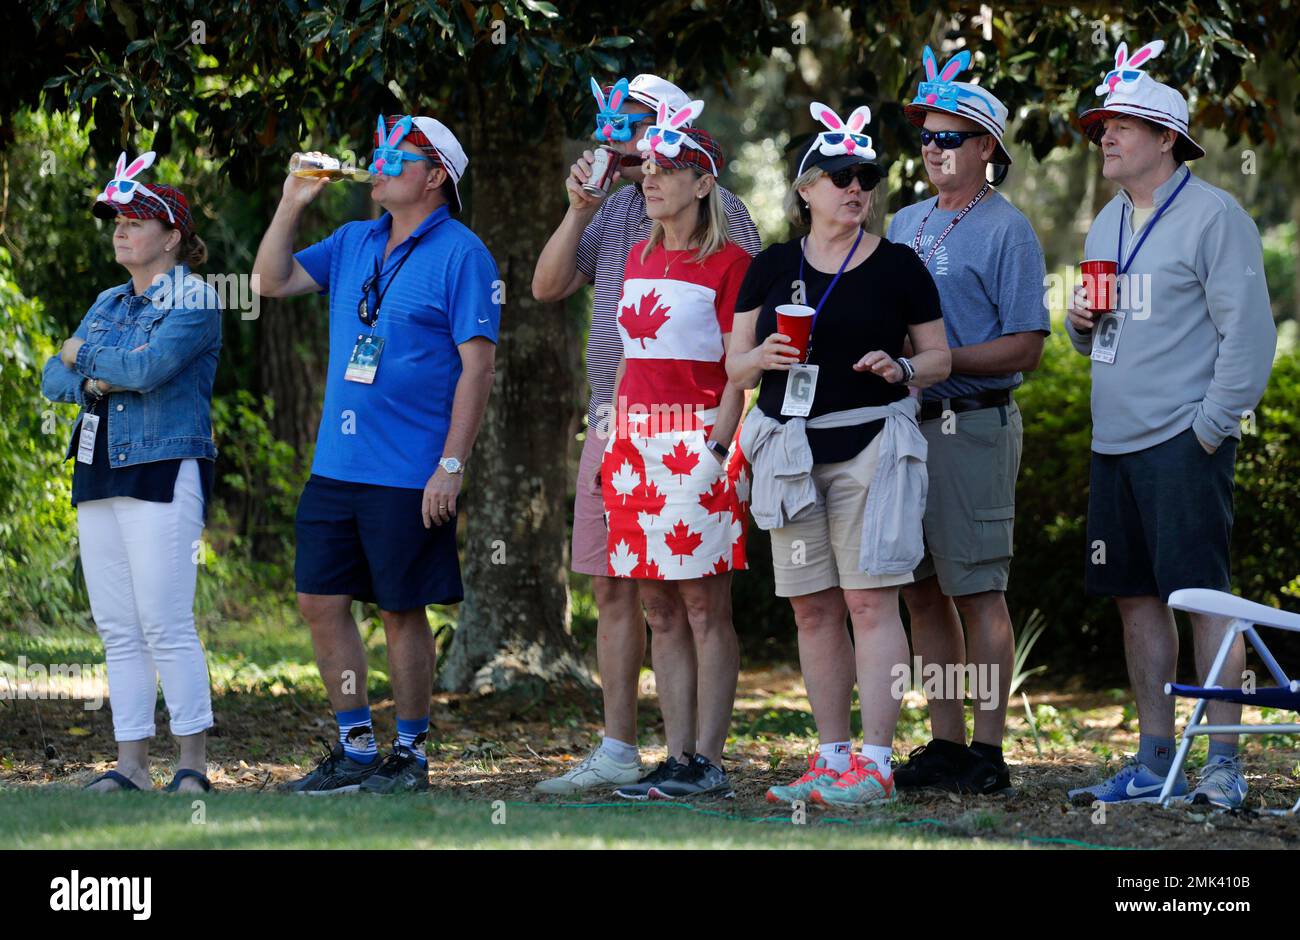 Patrons watch Dustin Johnson on the seventh hole dressed with Easter Bunny ears during the final round of the RBC Heritage golf tournament at Harbour Town Golf Links on Hilton Head Island,